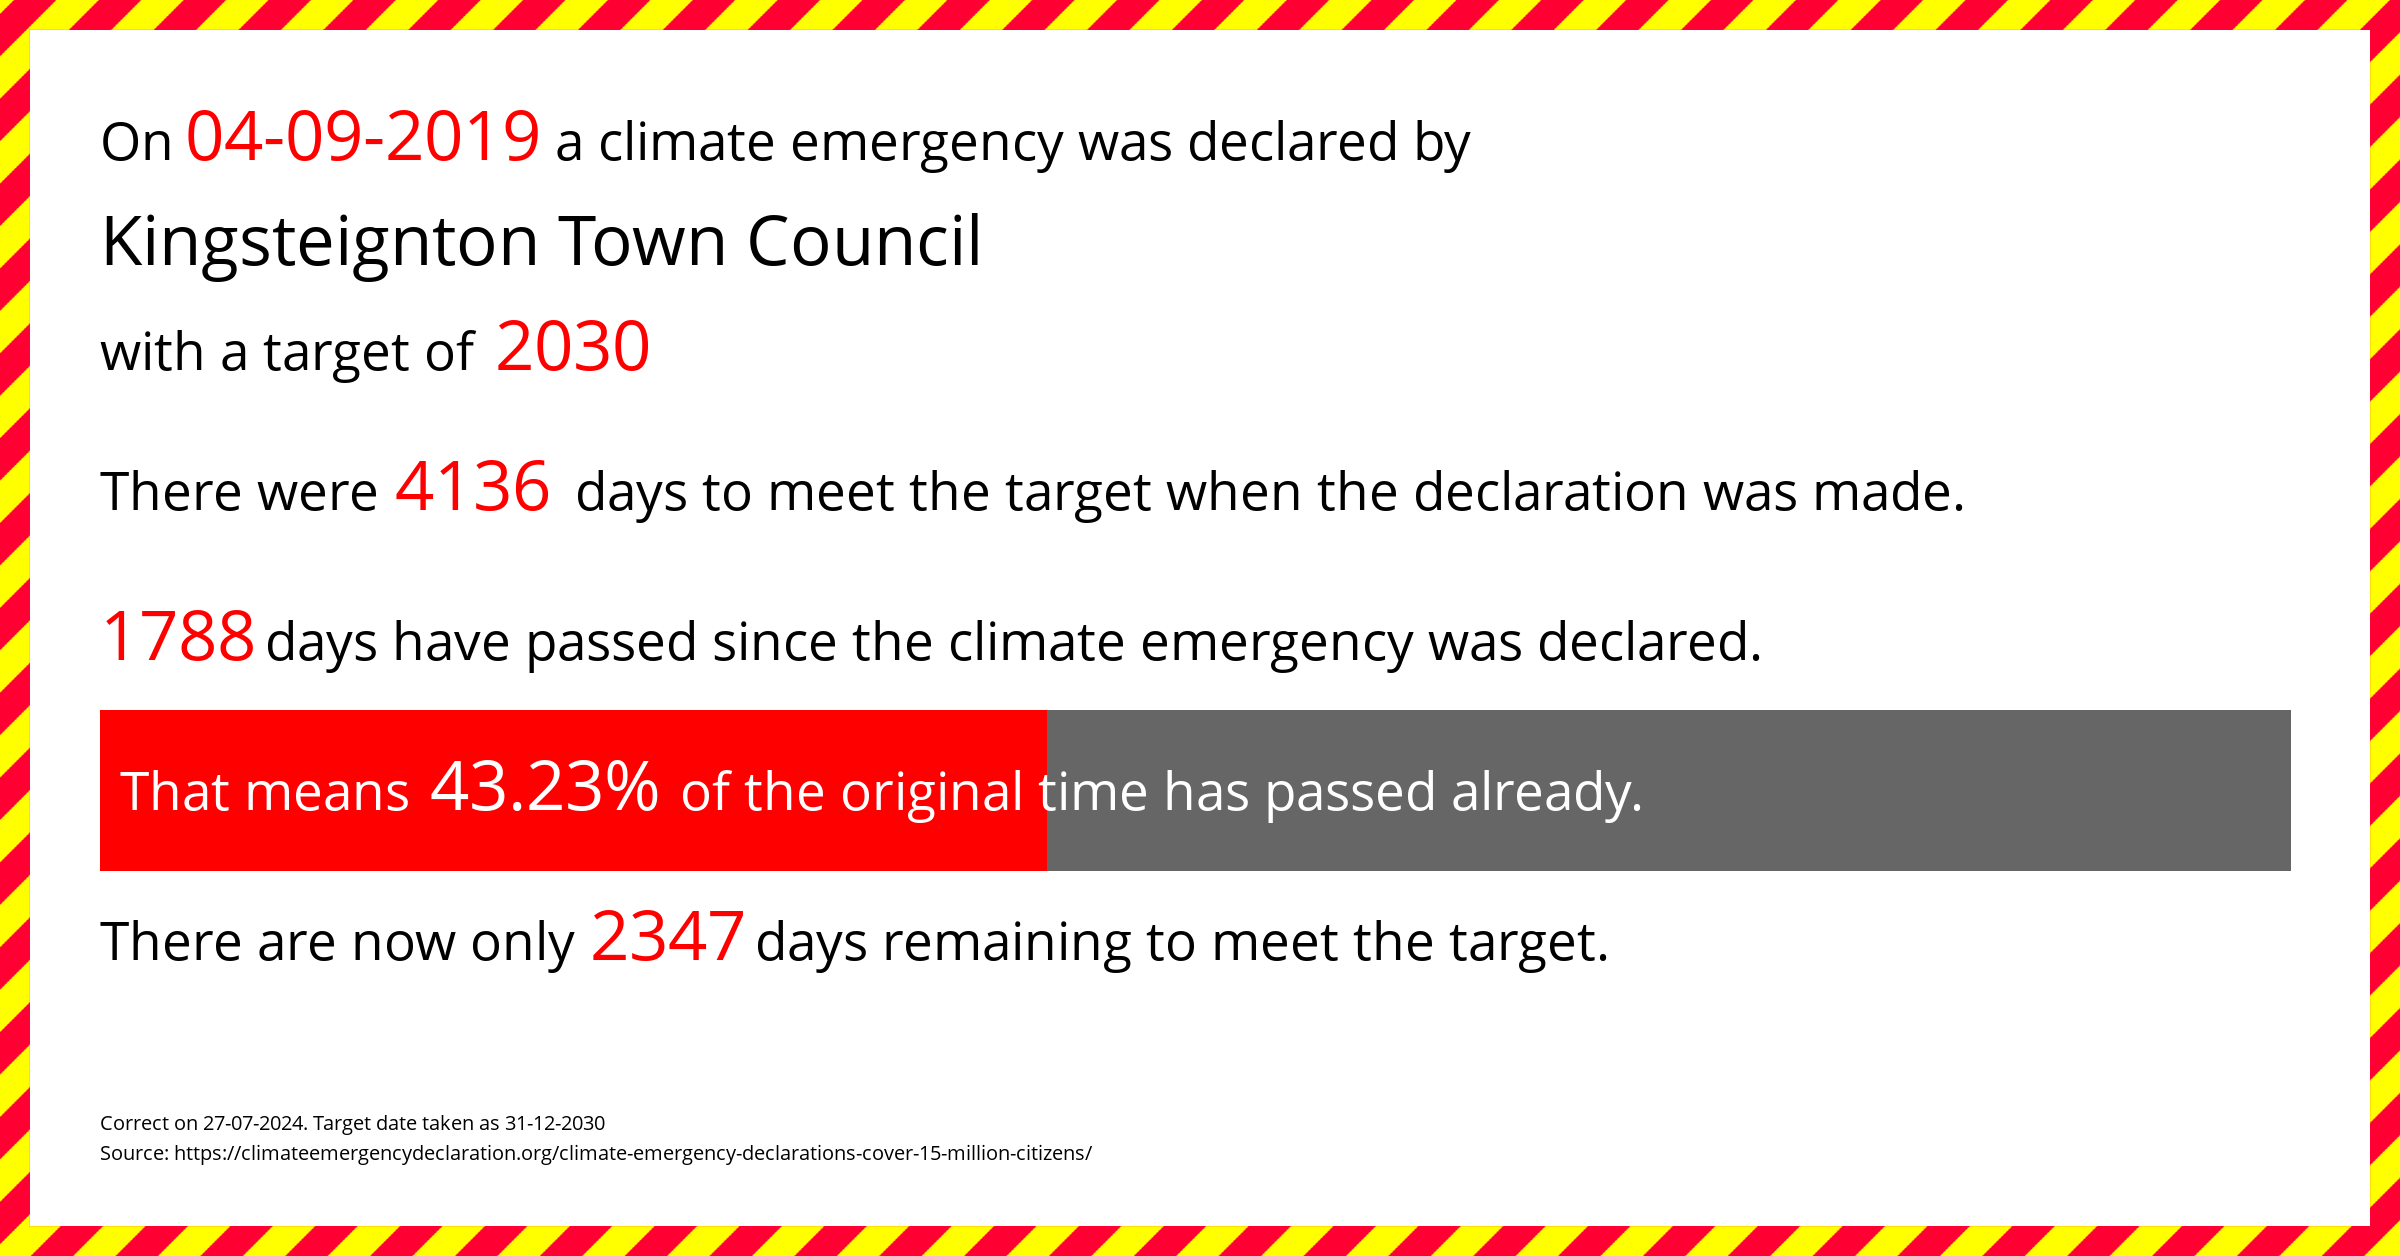 Kingsteignton Town Council declared a Climate emergency on Wednesday 4th September 2019, with a target of 2030.